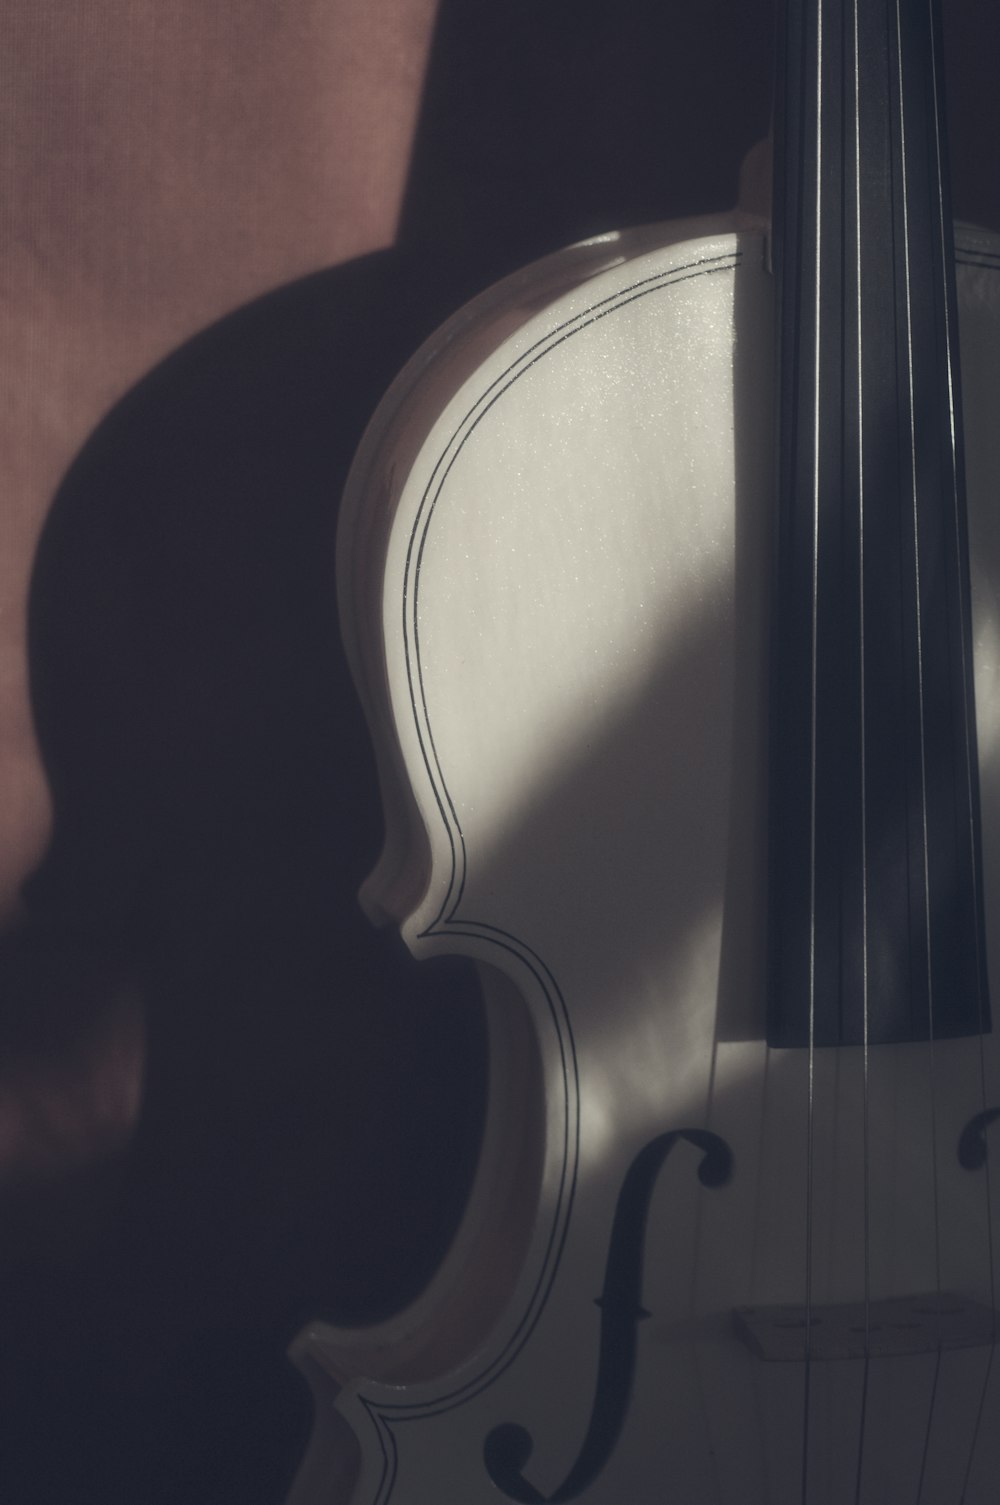 a close up of a violin on a table